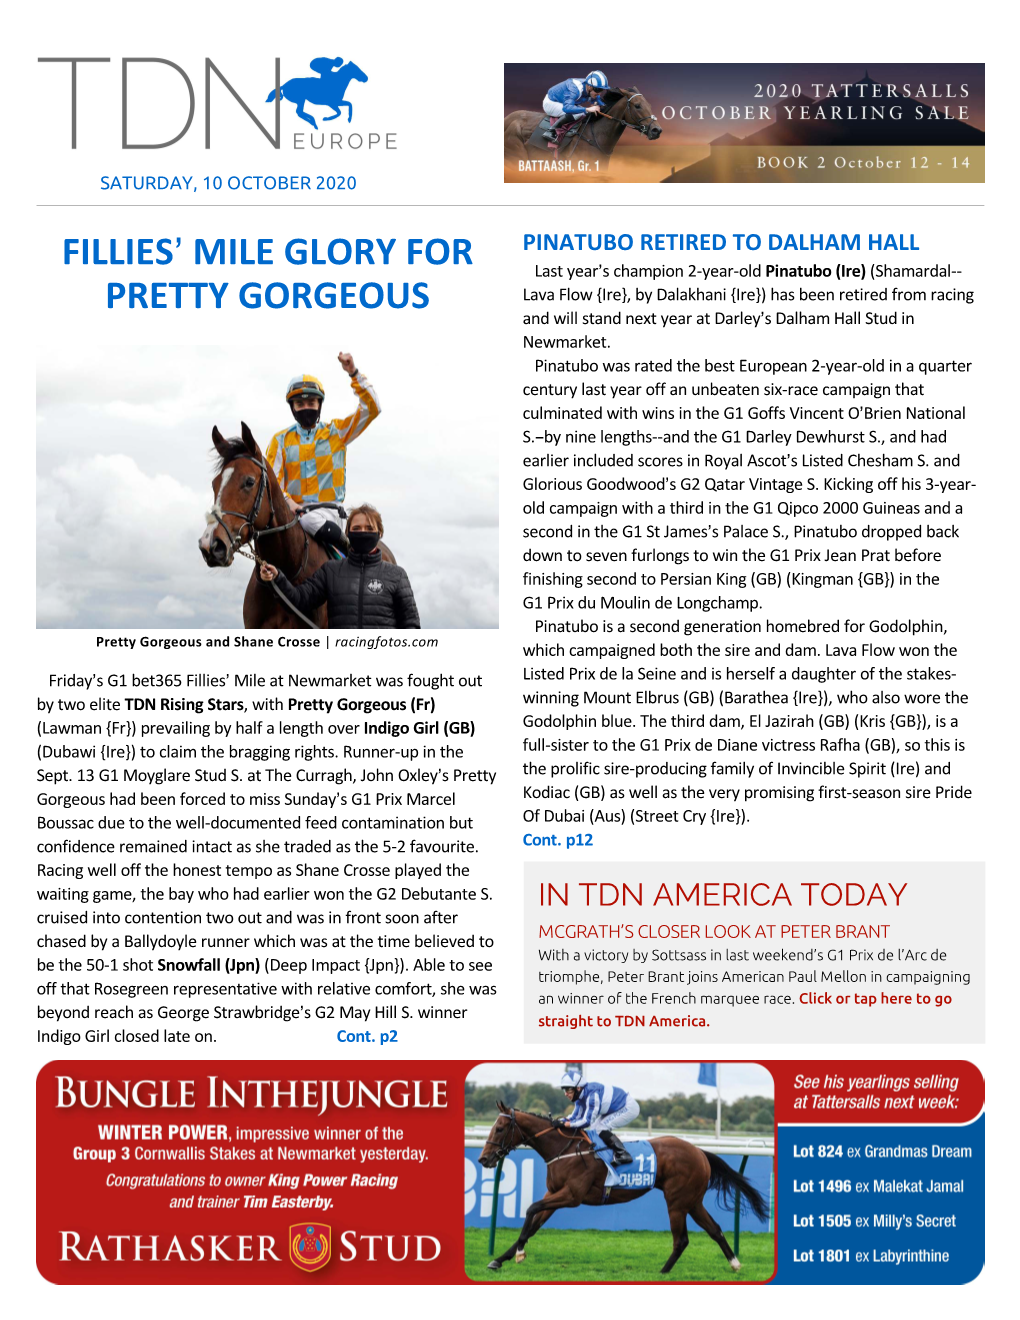 Fillies= Mile Glory for Pretty Gorgeous Cont